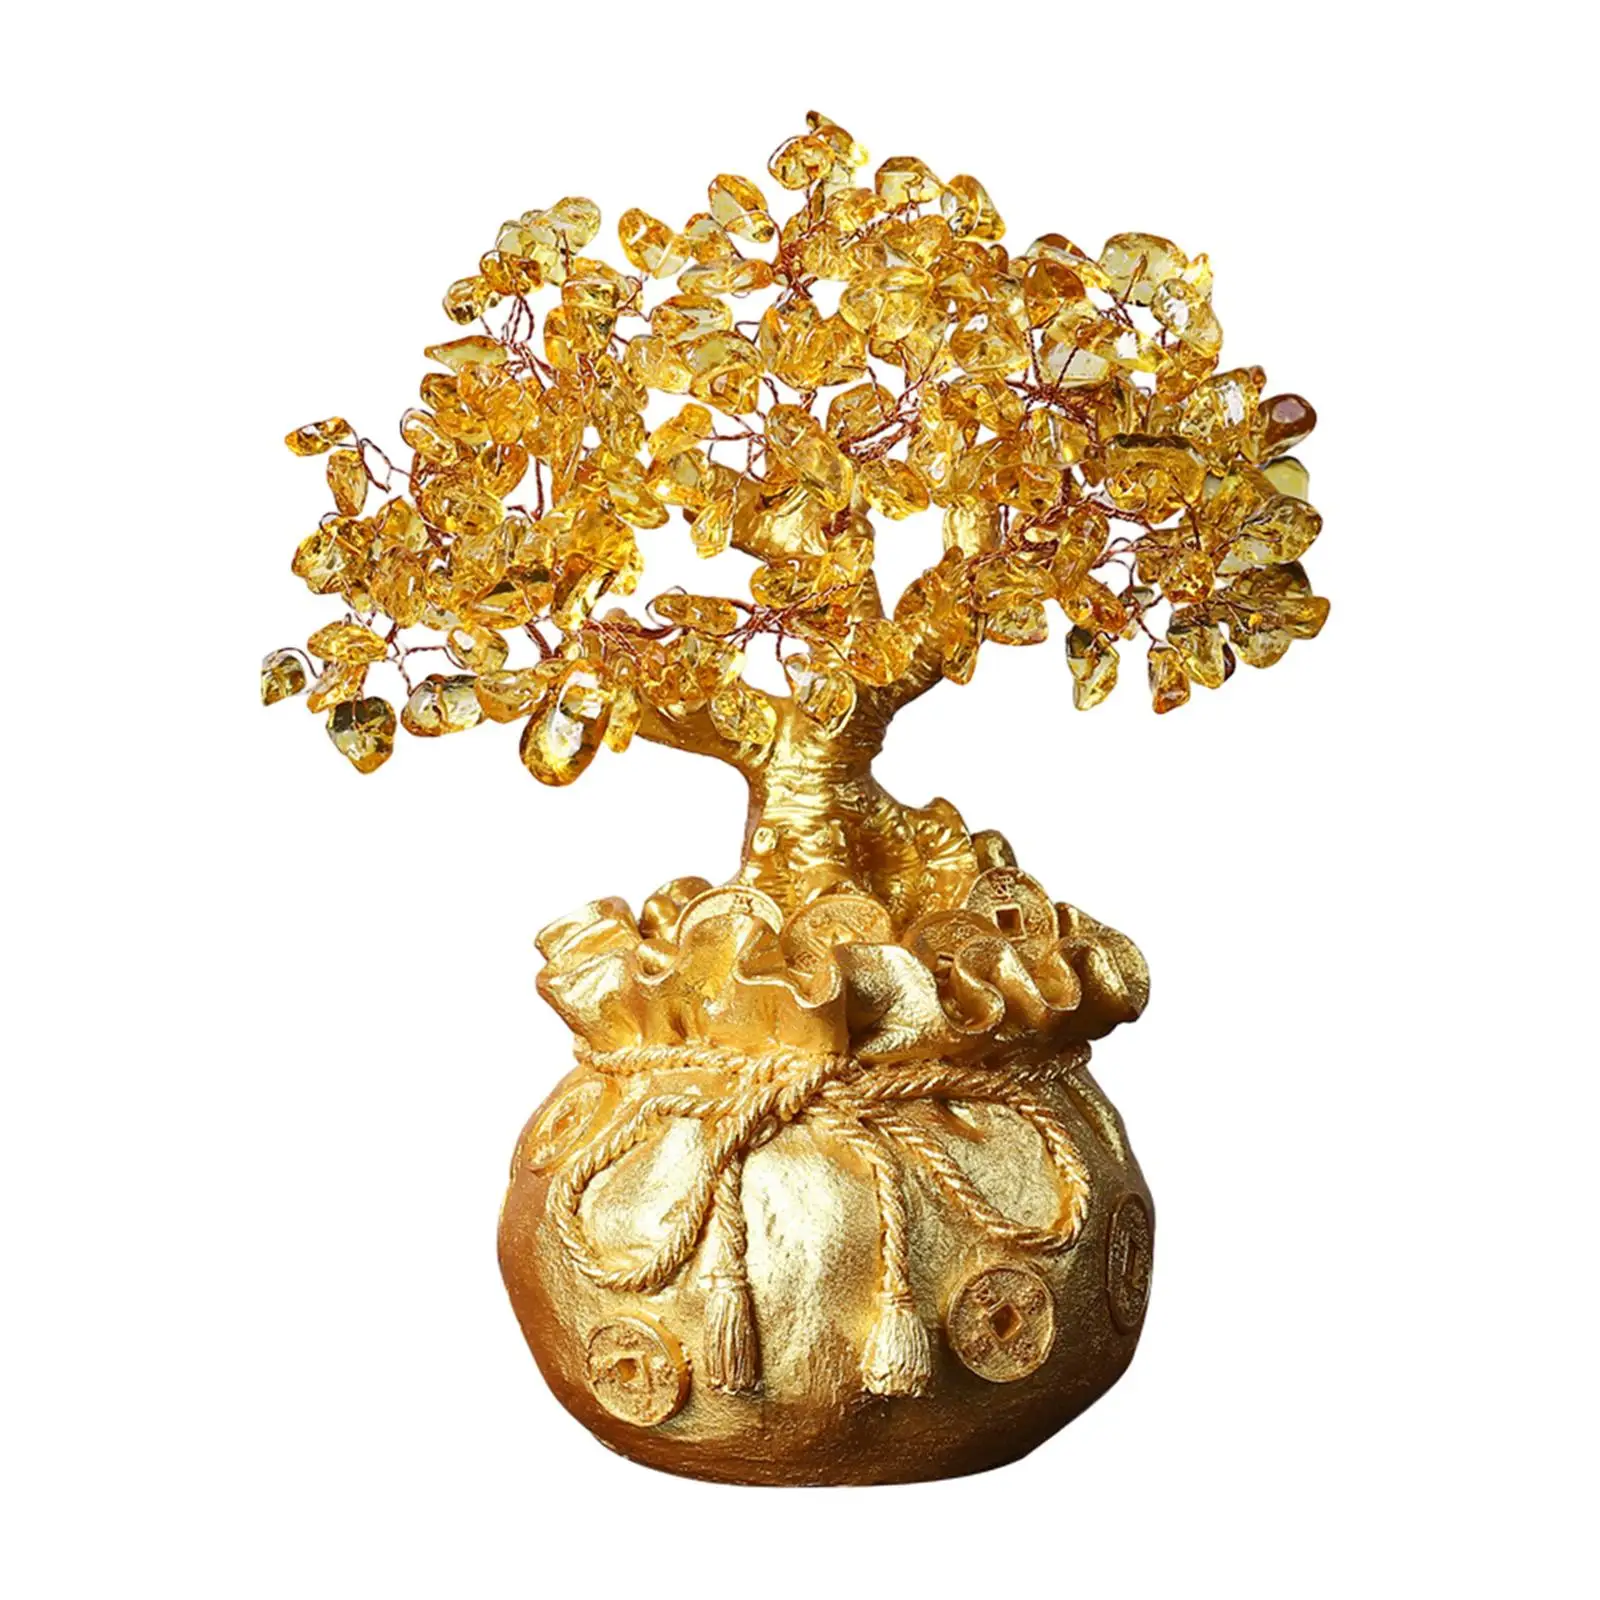 Lucky Tree Feng Shui Home Decor Home Decoration Bonsai Style Chinese Decorations Money Tree Chinese Fortune Tree for New Year